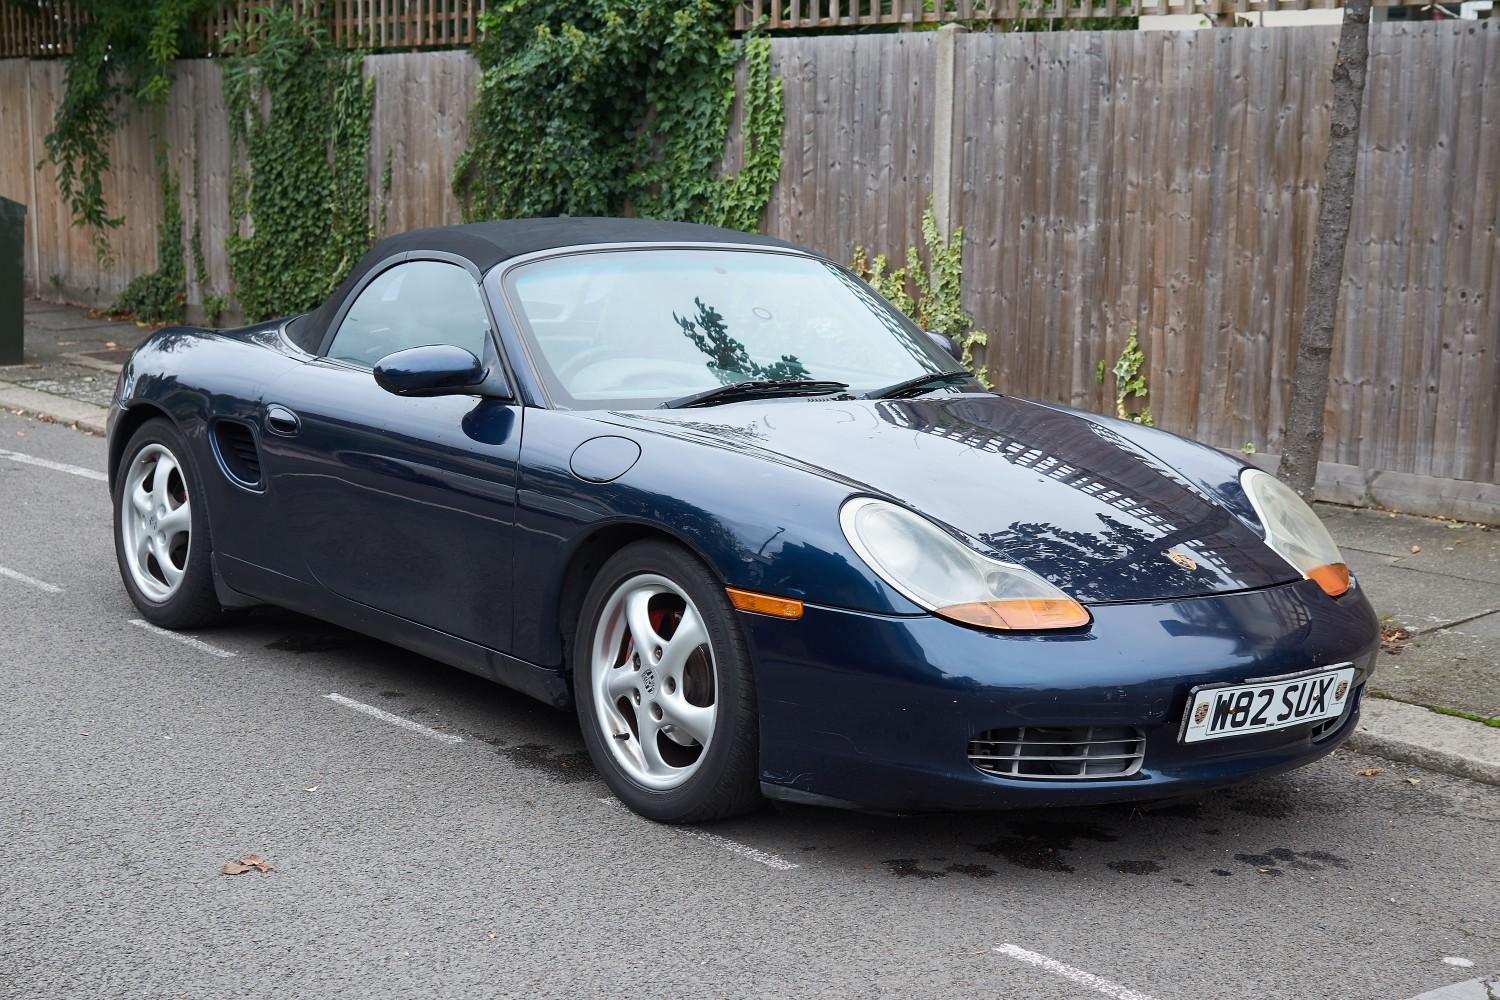 Porsche boxster 2.7 2000 in NW10 Brent for £3,650.00 for